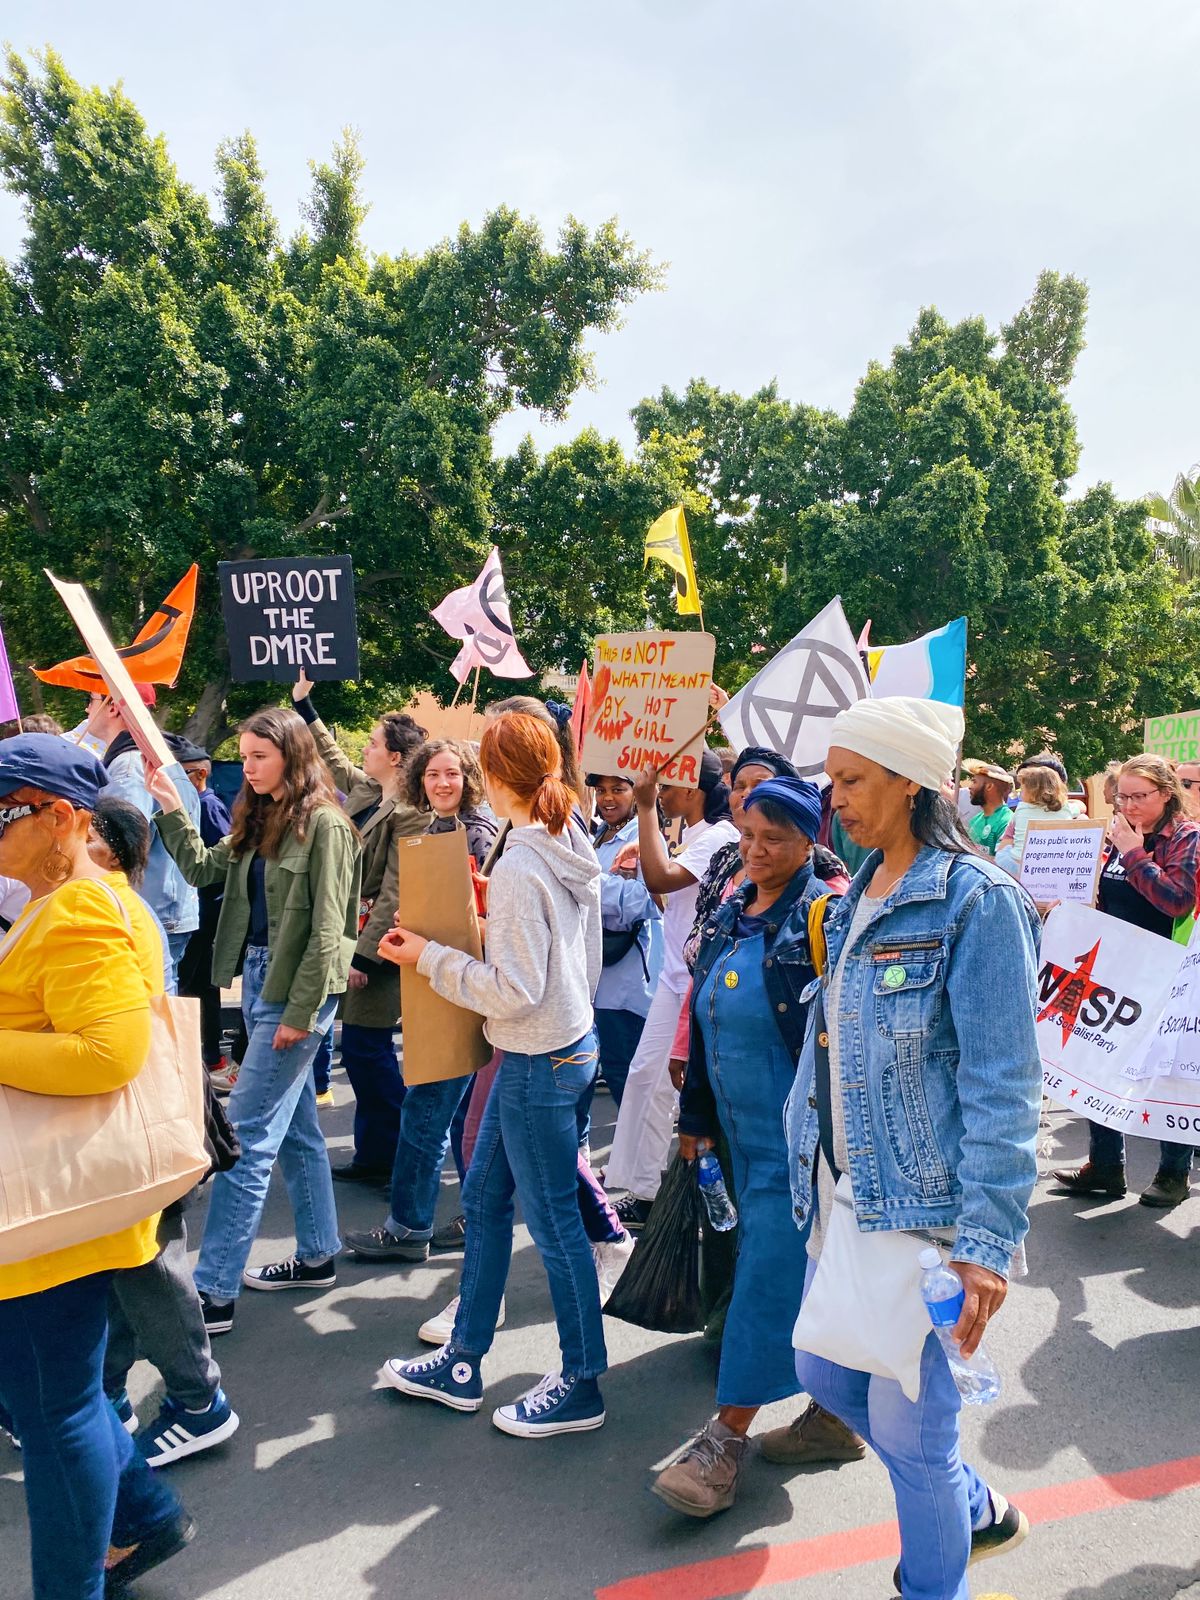 The climate crisis demands system change and that’s why we’re marching, not braaiing on Heritage Day by Isabelle Joubert